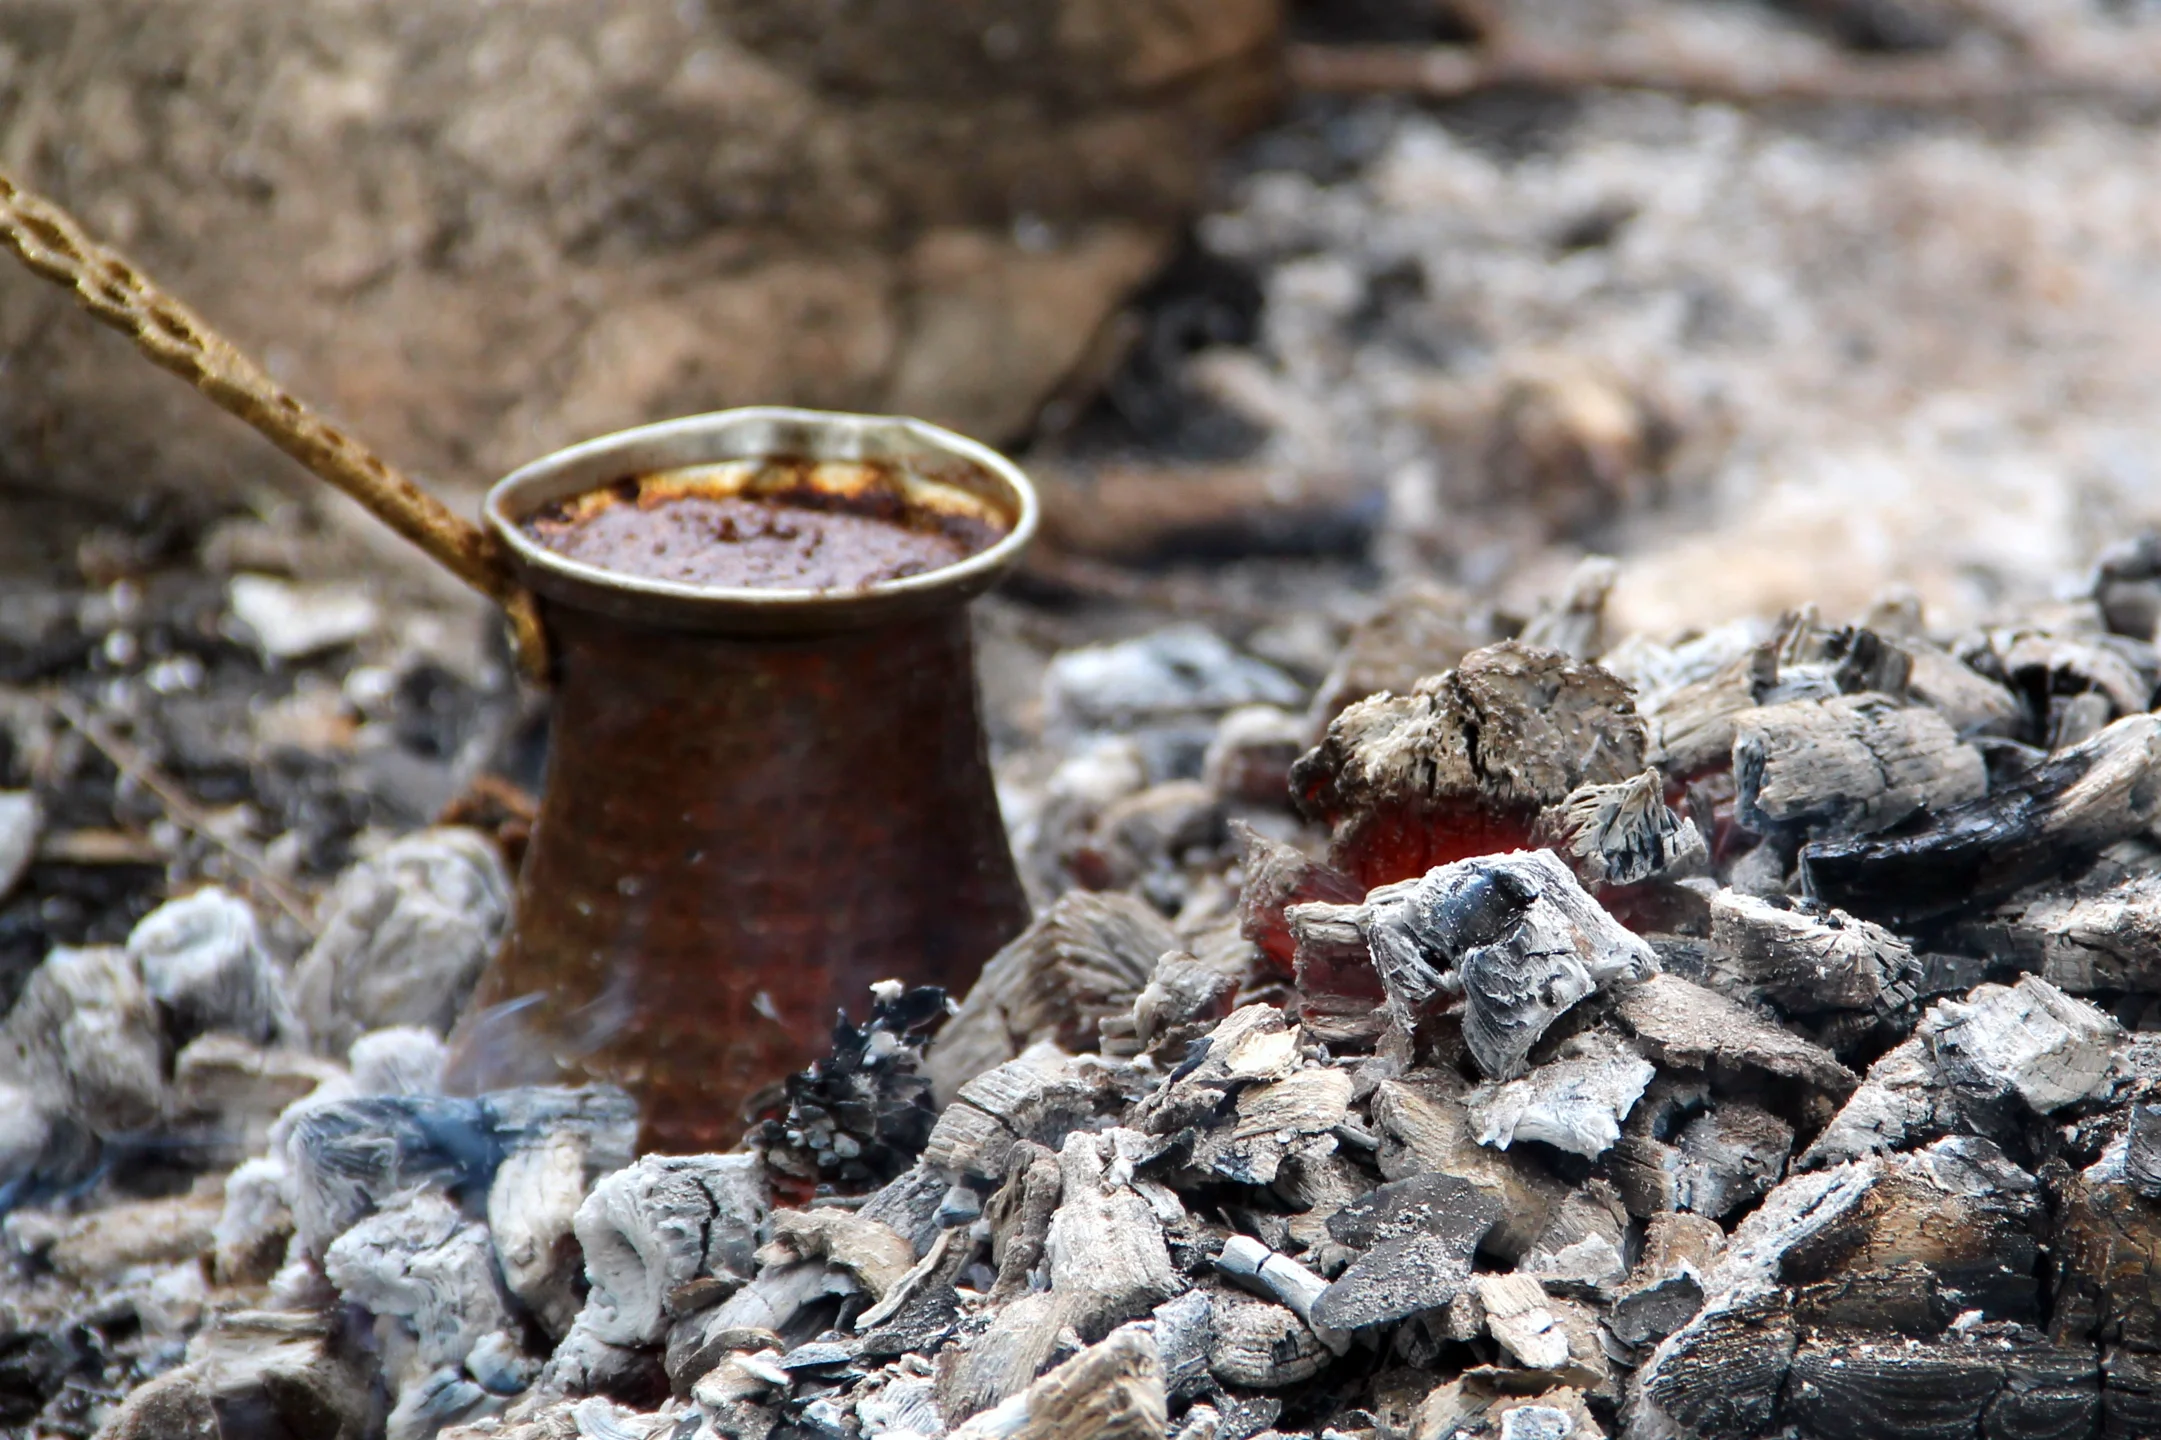 Coffee preparation in the cezve in glowing coals.